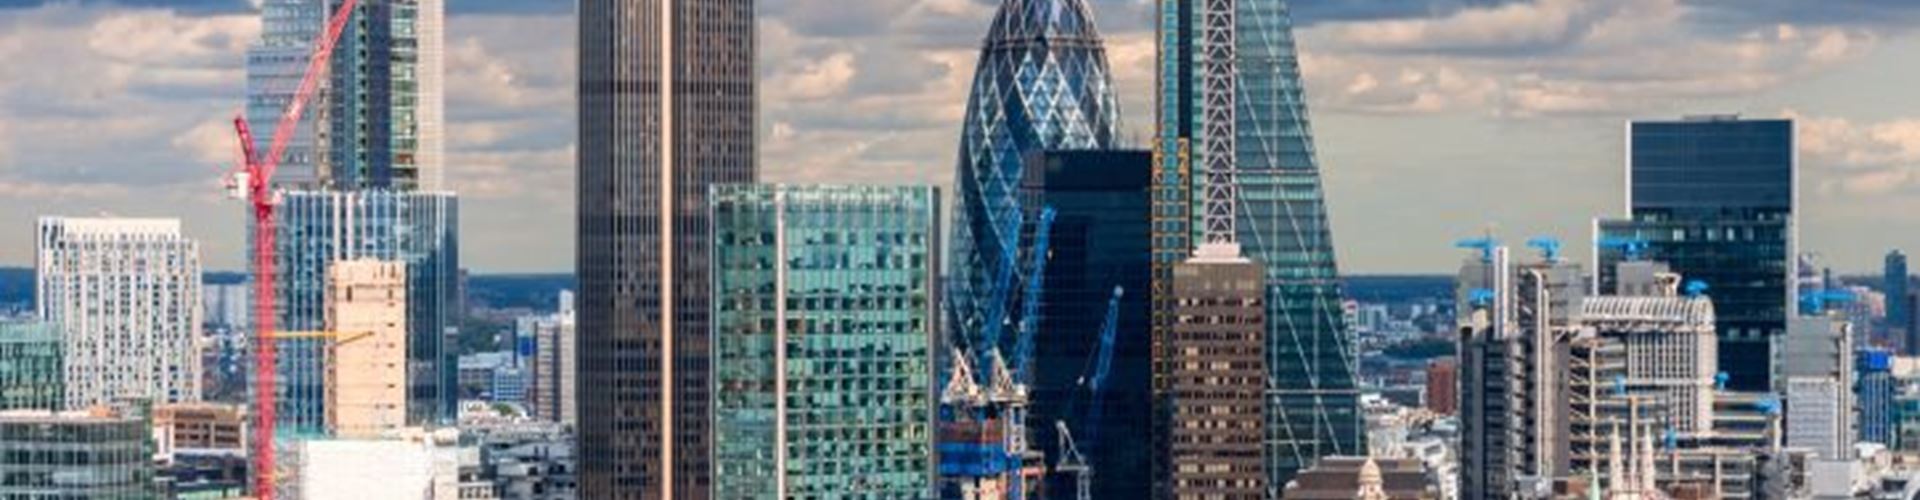 London financial services jobs hit record high